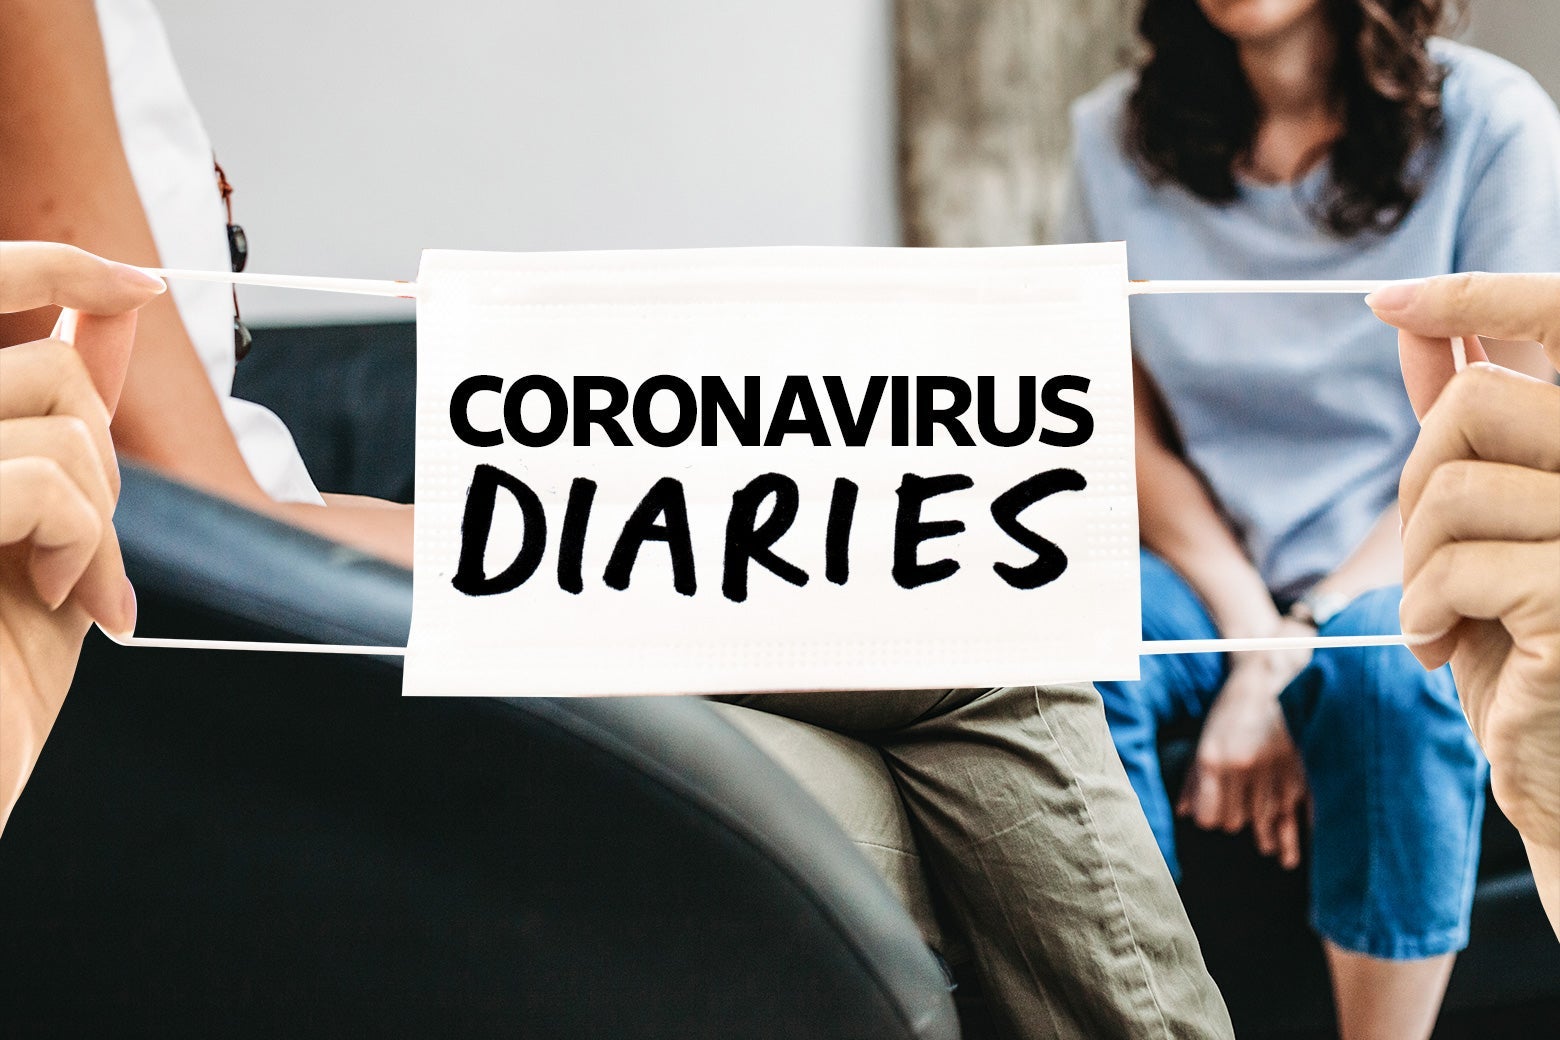 Two women sit behind hands holding a surgical mask that says "Coronavirus Diaries."